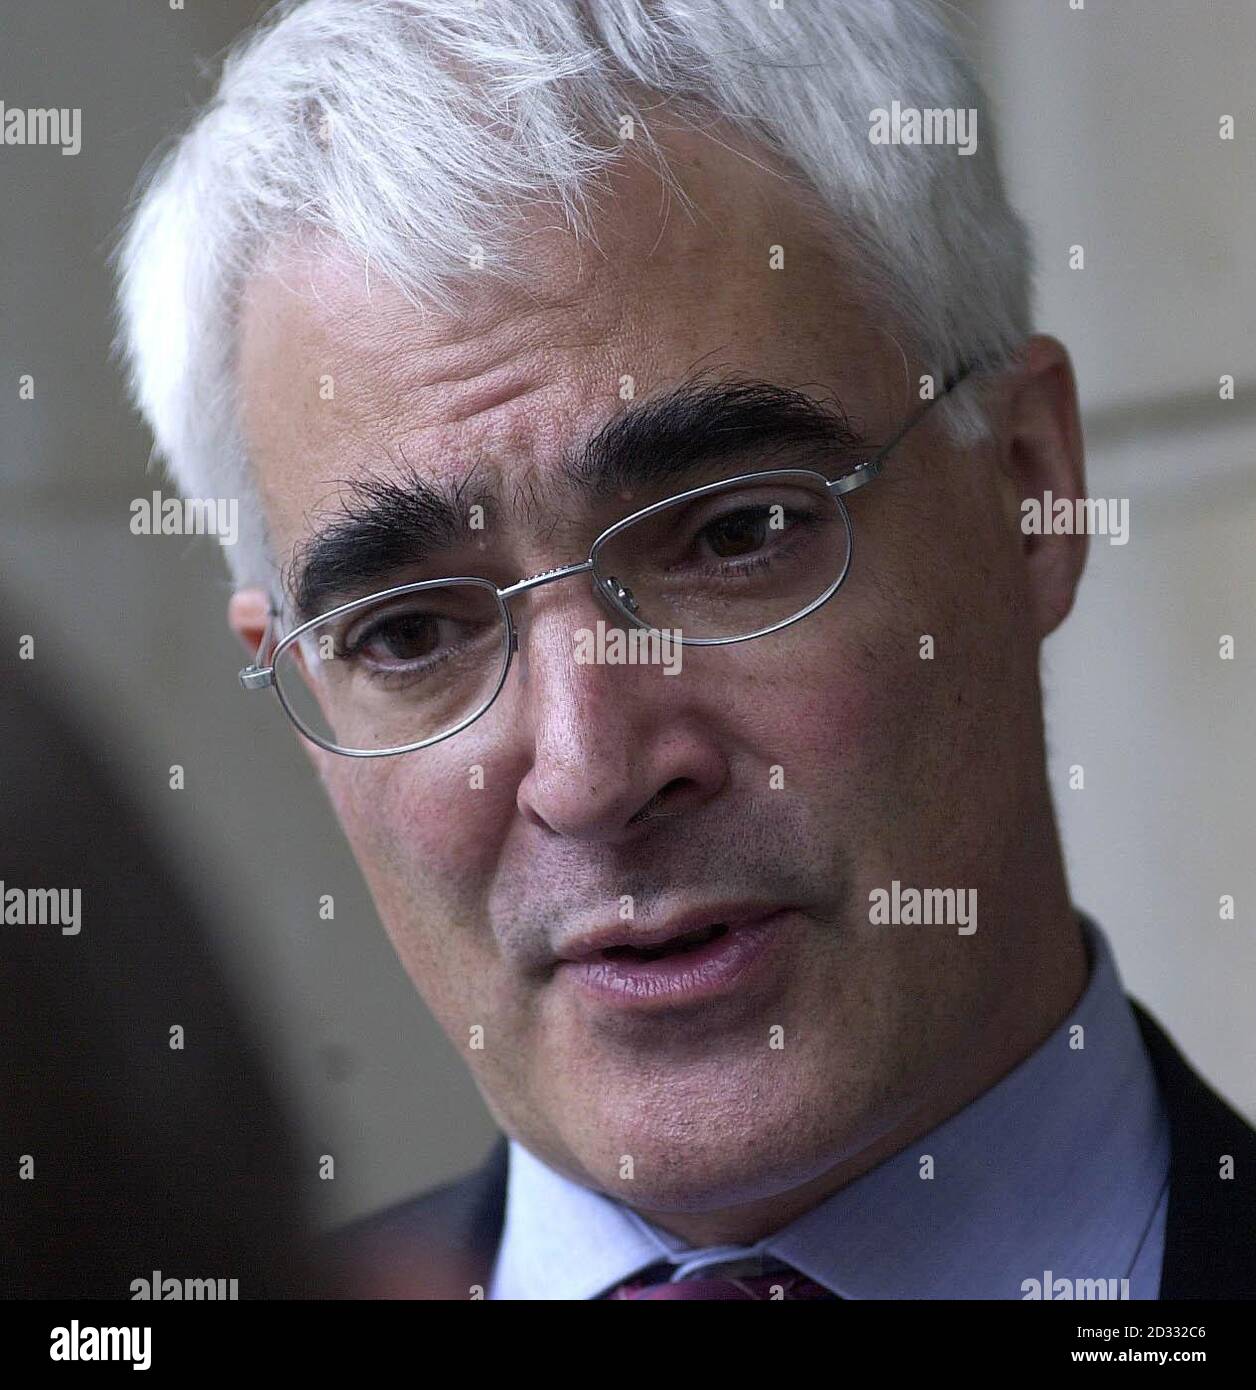 Transport Secretary Alistair Darling arrives at the Scottish Office in London, where he was holding talks with Scottish First Minister Jack McConnell and Secretary for Constitutional Affairs Lord Falconer.  *  In last week's Cabinet reshuffle, it was announced that the job of Secretary of State for Scotland would be undertaken by Alistair Darling in addition to his current role as Transport Secretary.  The Scottish and Welsh Offices now come under the ultimate responsibility of Lord Falconer's Department of Constitutional Affairs. Stock Photo